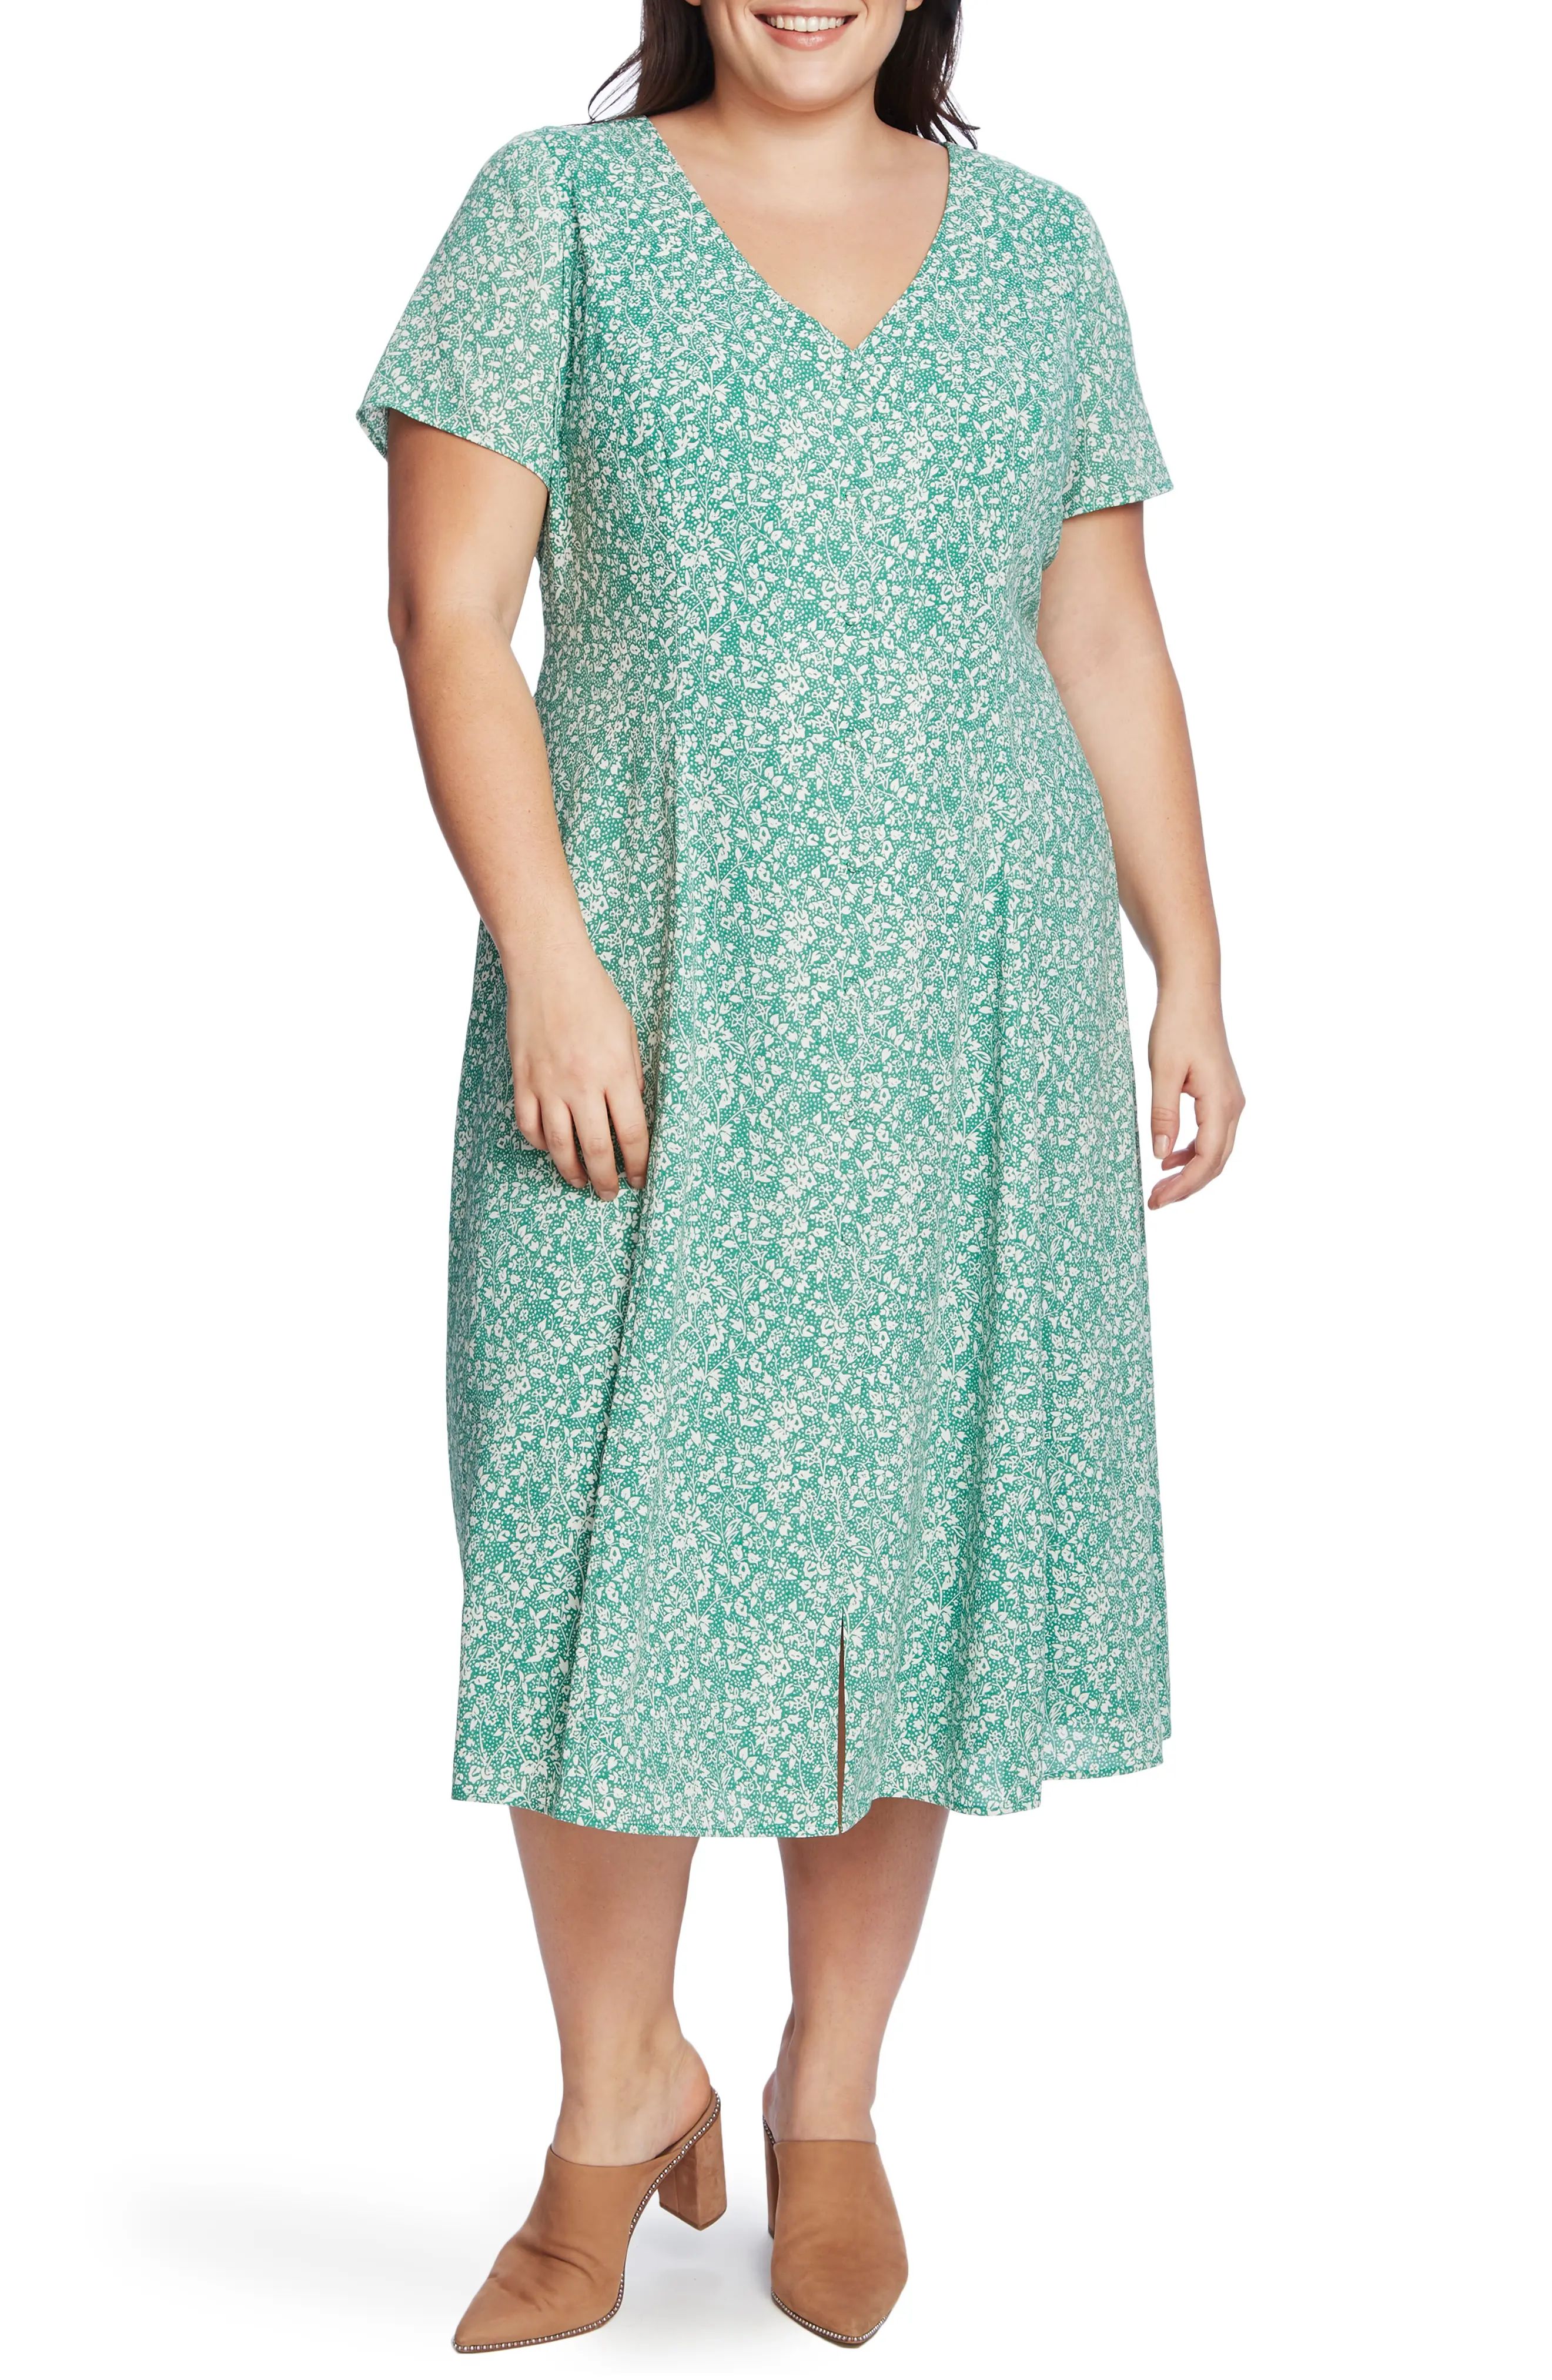 Plus Size Women's 1.state Floral Folk Silhouette Button Front Dress, Size 22W - Green | Nordstrom